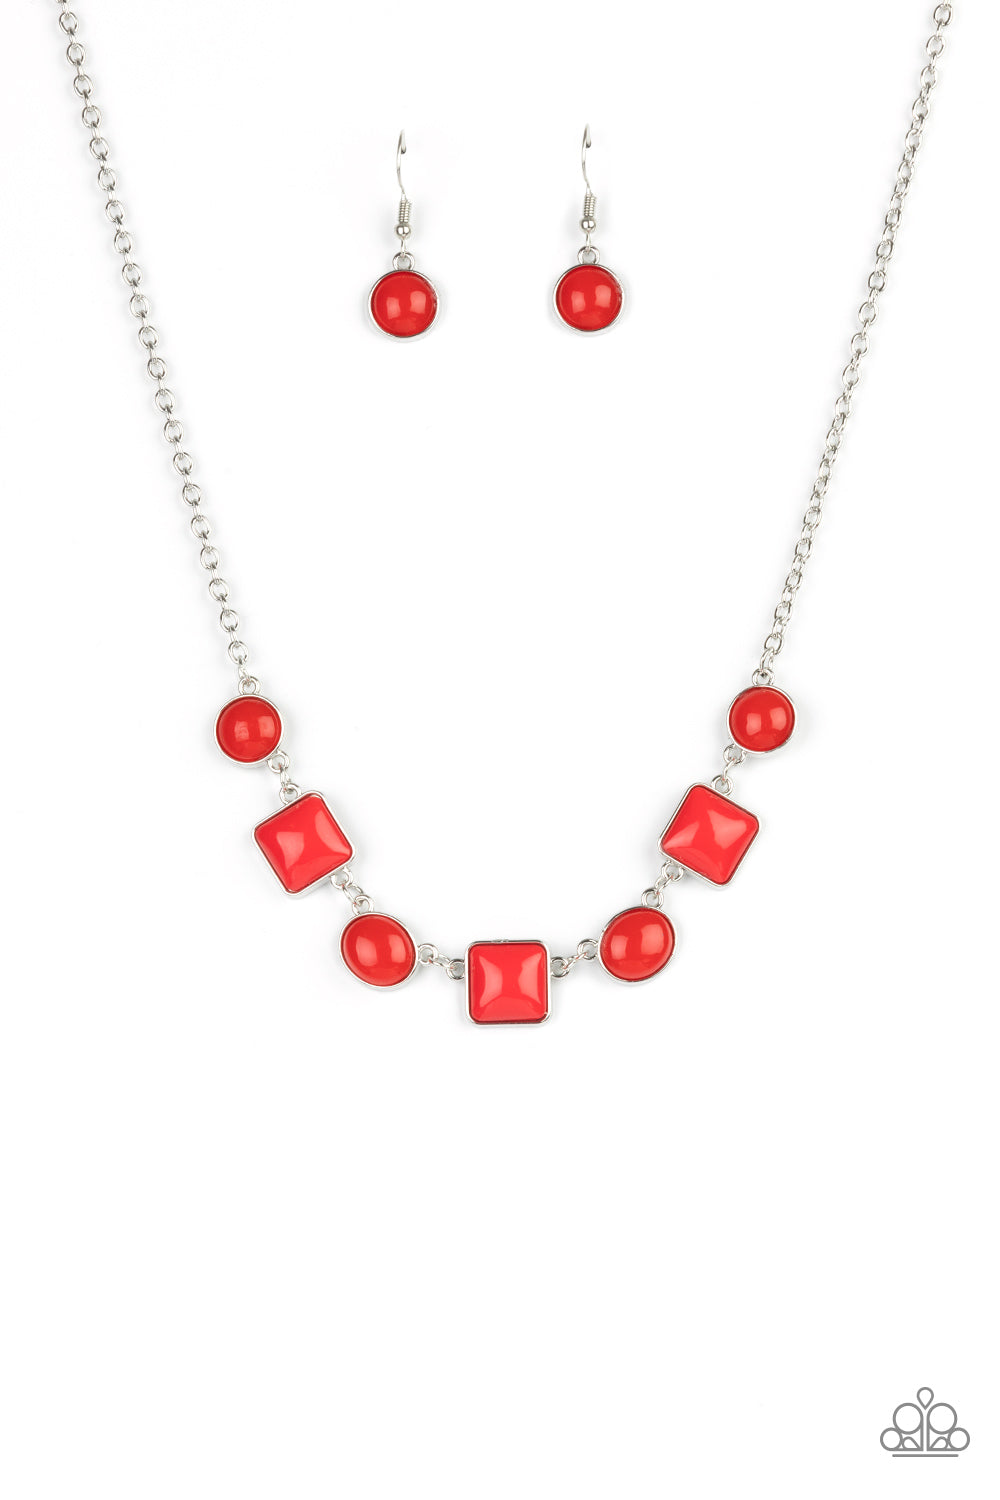 Trend Worthy - Red Square & Round Beaded Paparazzi Necklace & matching earrings